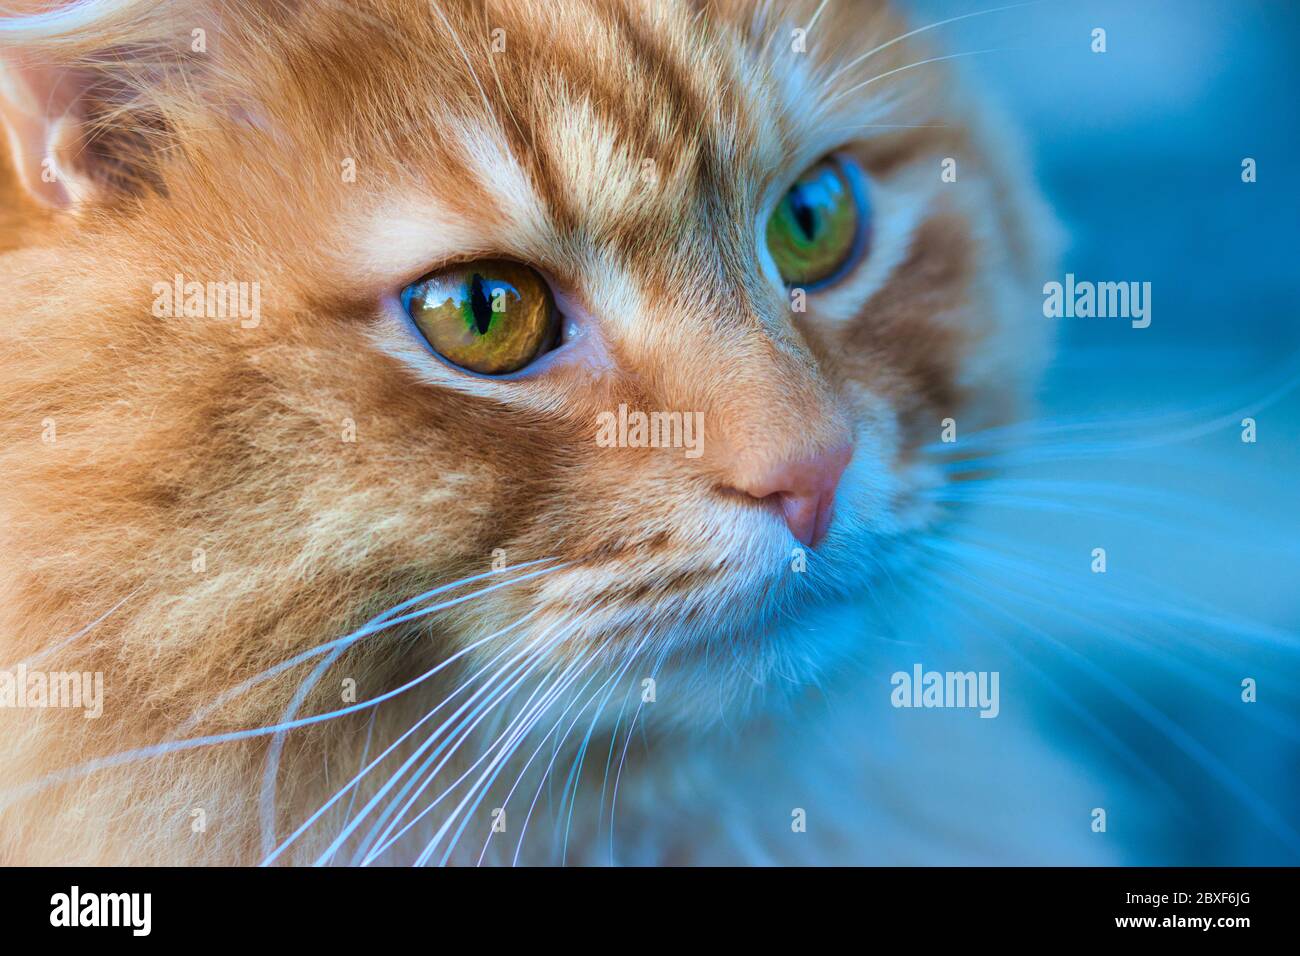 Ginger red long haired tabby cat with green orange eyes, detailed close up portrait of cats face, eyes, nose and whiskers, blurred blue background, Stock Photo